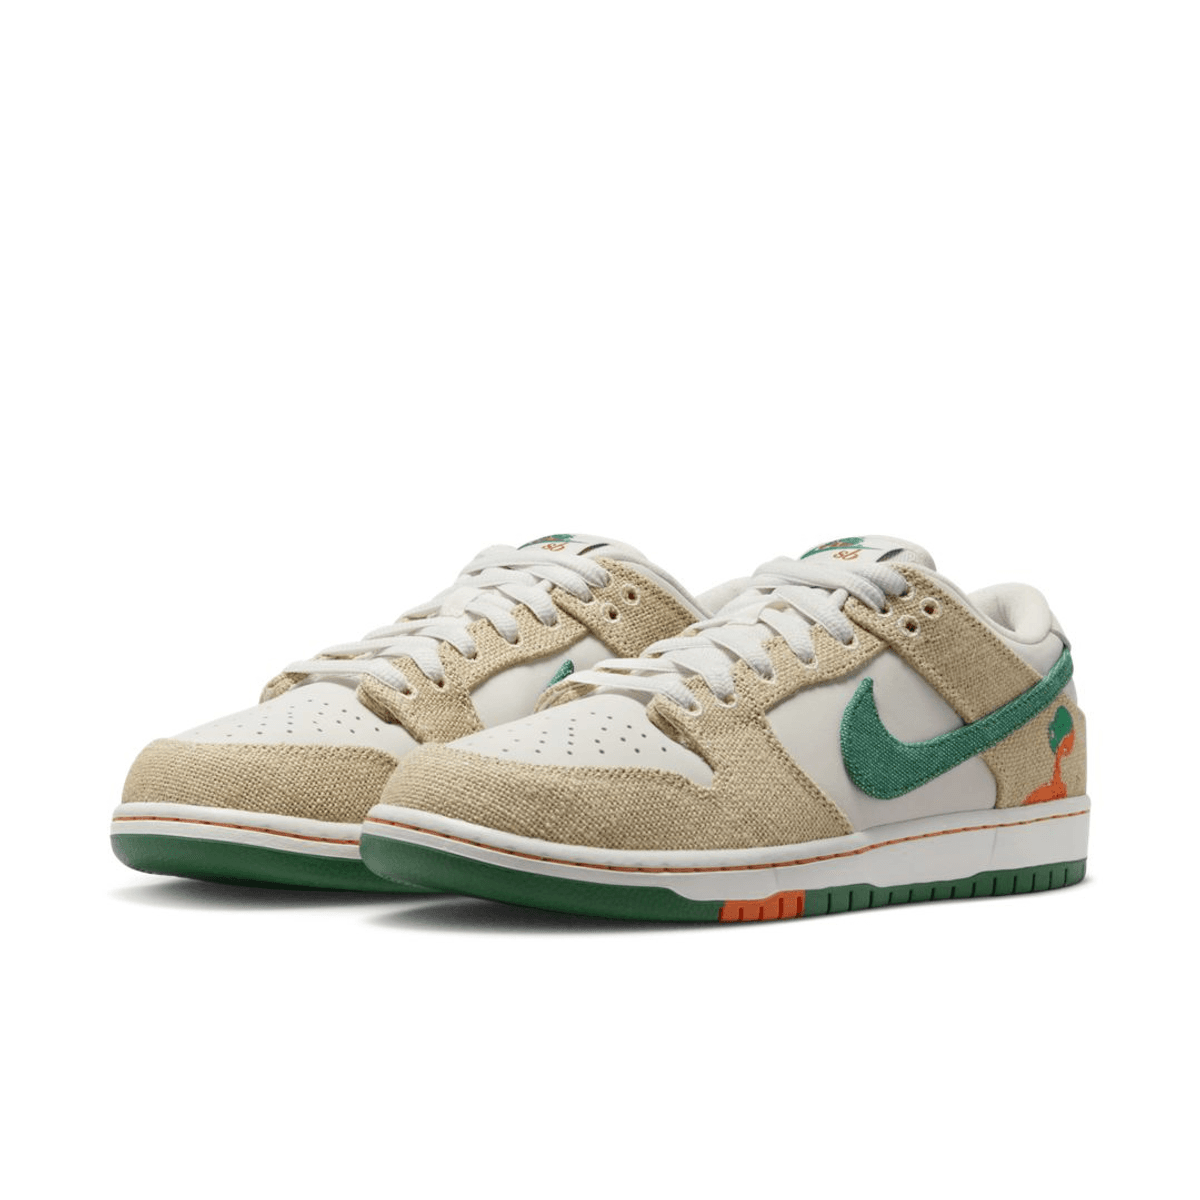 Everything We Know About The Jarritos x Nike SB Dunk Low Collaboration